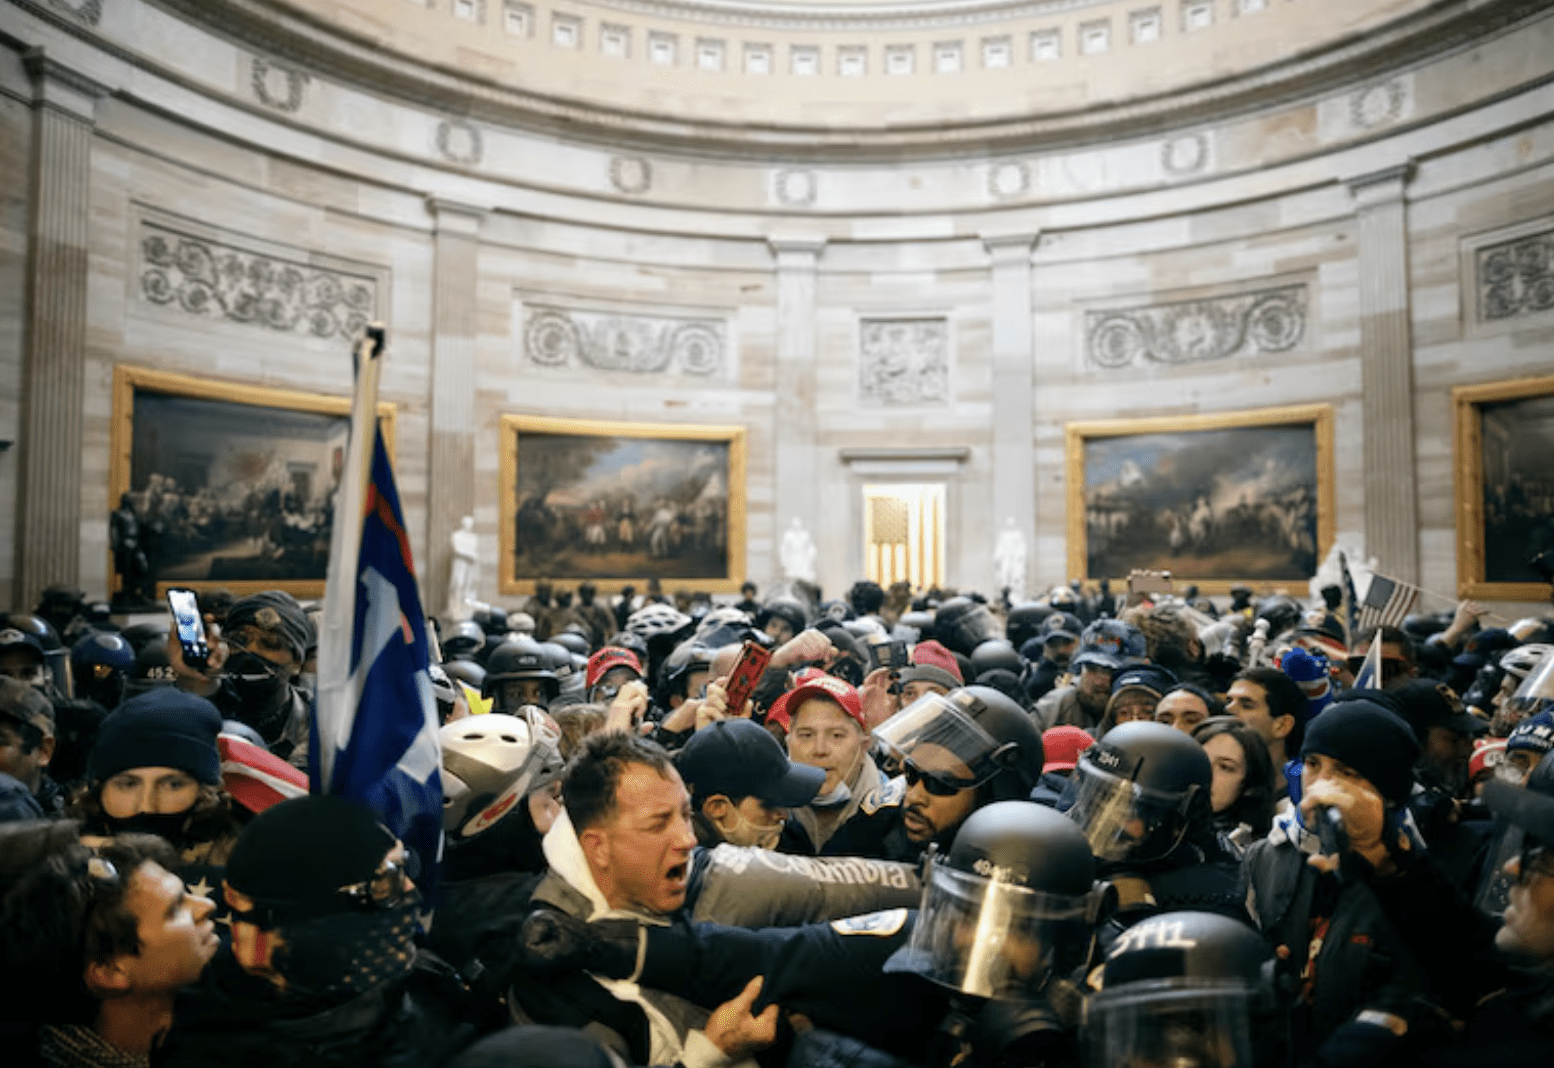 Police clash with supporters of President Donald Trump who breached security and entered the Capitol building in Washington D.C., on Jan. 6, 2021.  Mostafa Bassim / Anadolu Agency via Getty Images